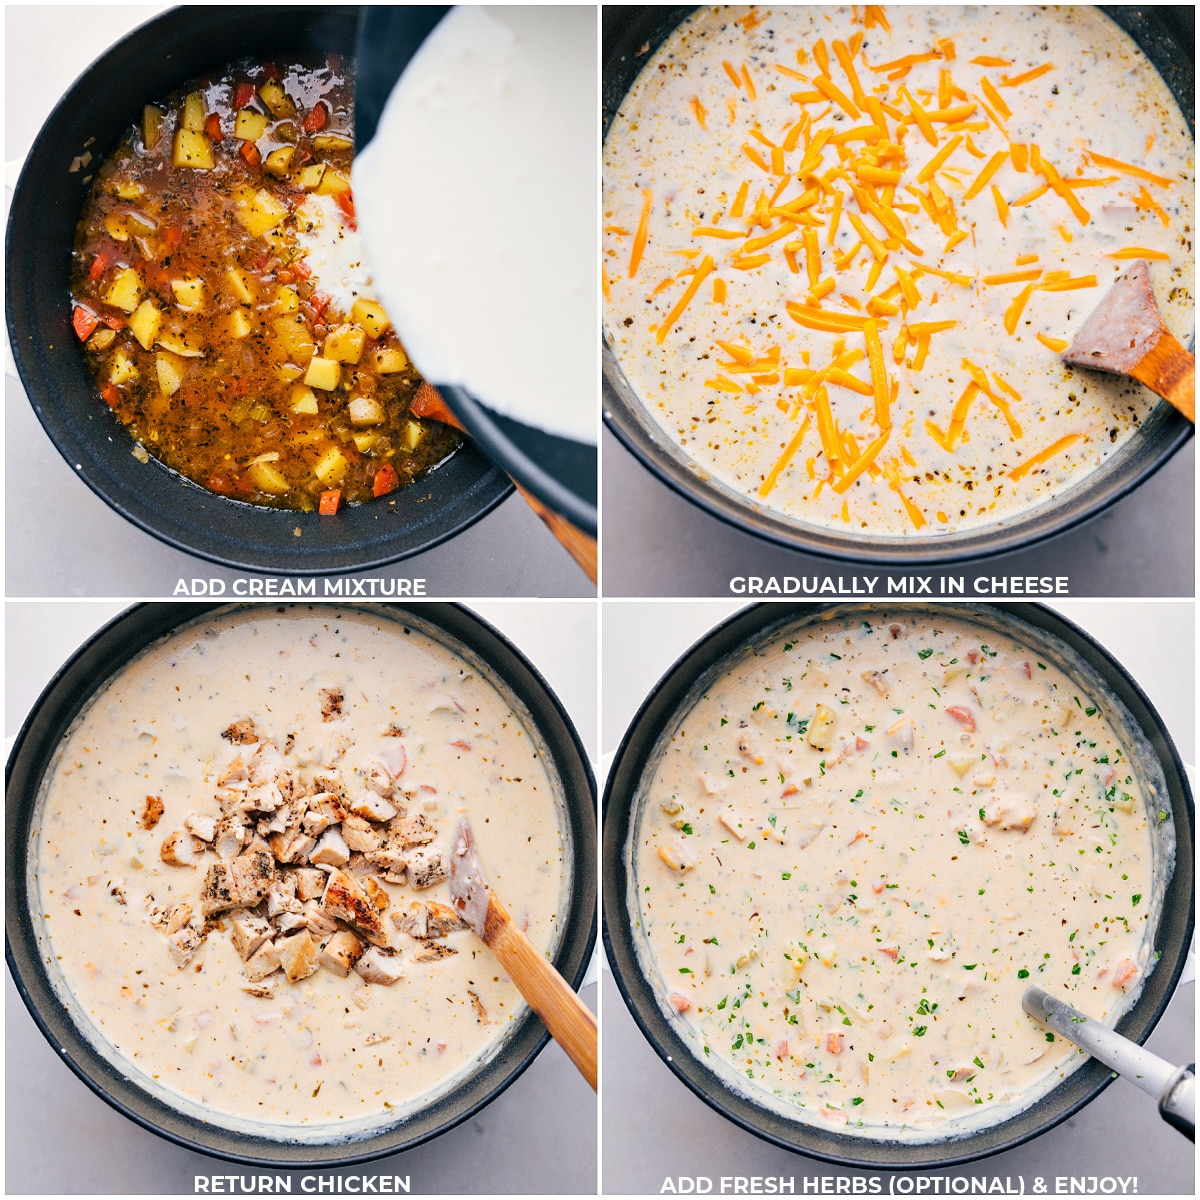 The cream mixture, cheese, and chicken being added to this creamy Chicken and Potato soup.